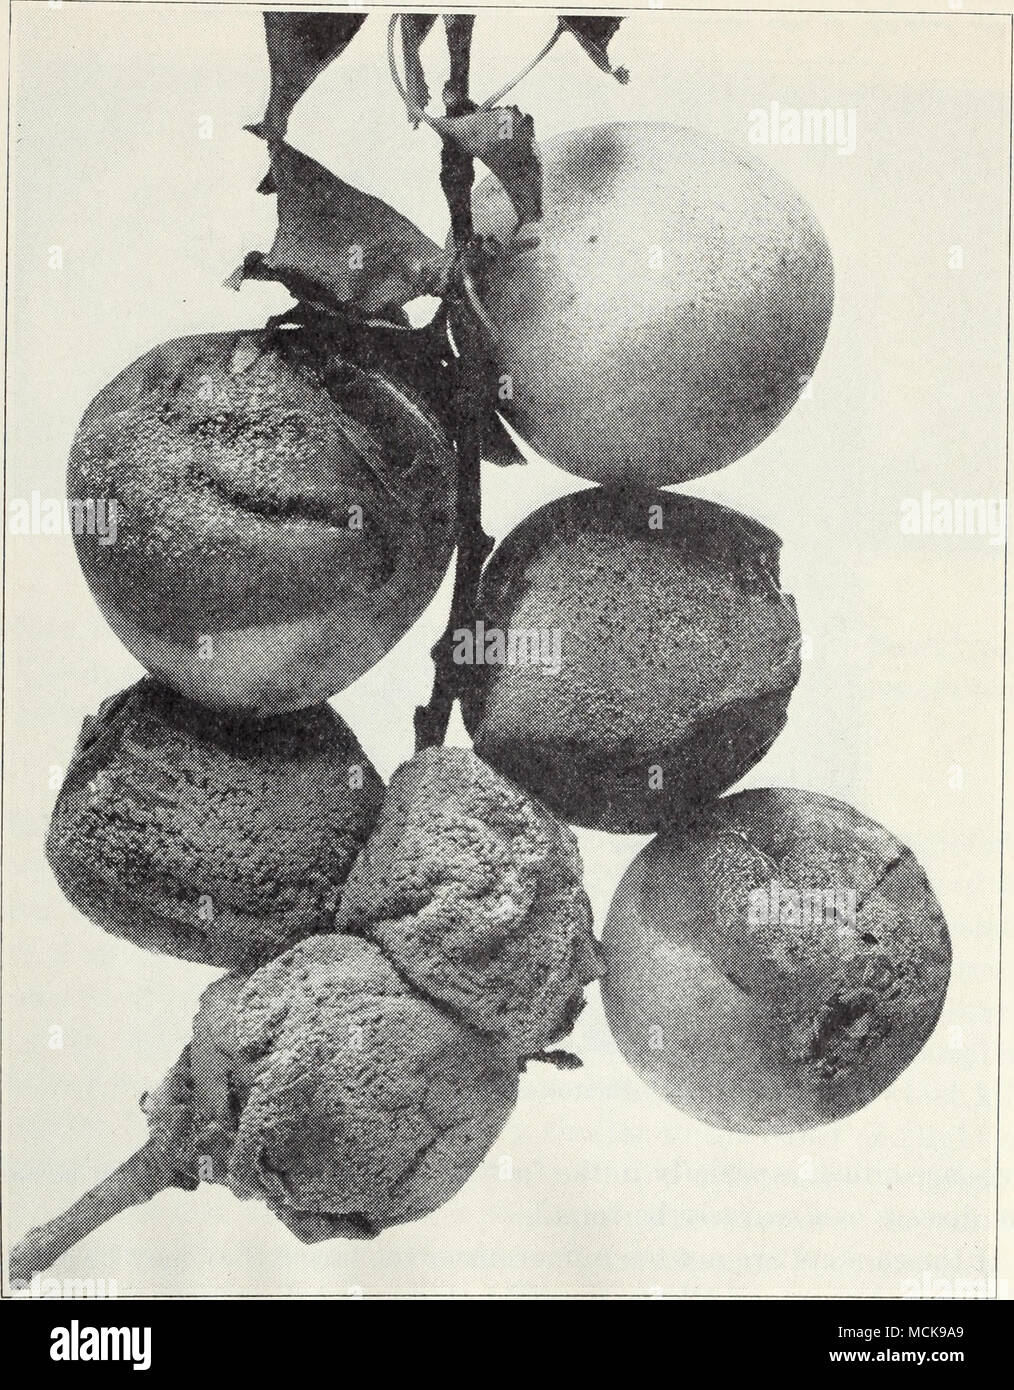 . Fig. 14.—Brown rot of apricot fruit. trees, some of the shoots and branches die suddenly in summer, the leaves remaining attached, and the wood is darkened far back into the tree. The disease is caused by a soil fungus, Verticillium alho-atrum, which also causes wilt in tomatoes, bluestem in raspberries, and similar diseases of many other plants. See general discussion on page 151. Stock Photo